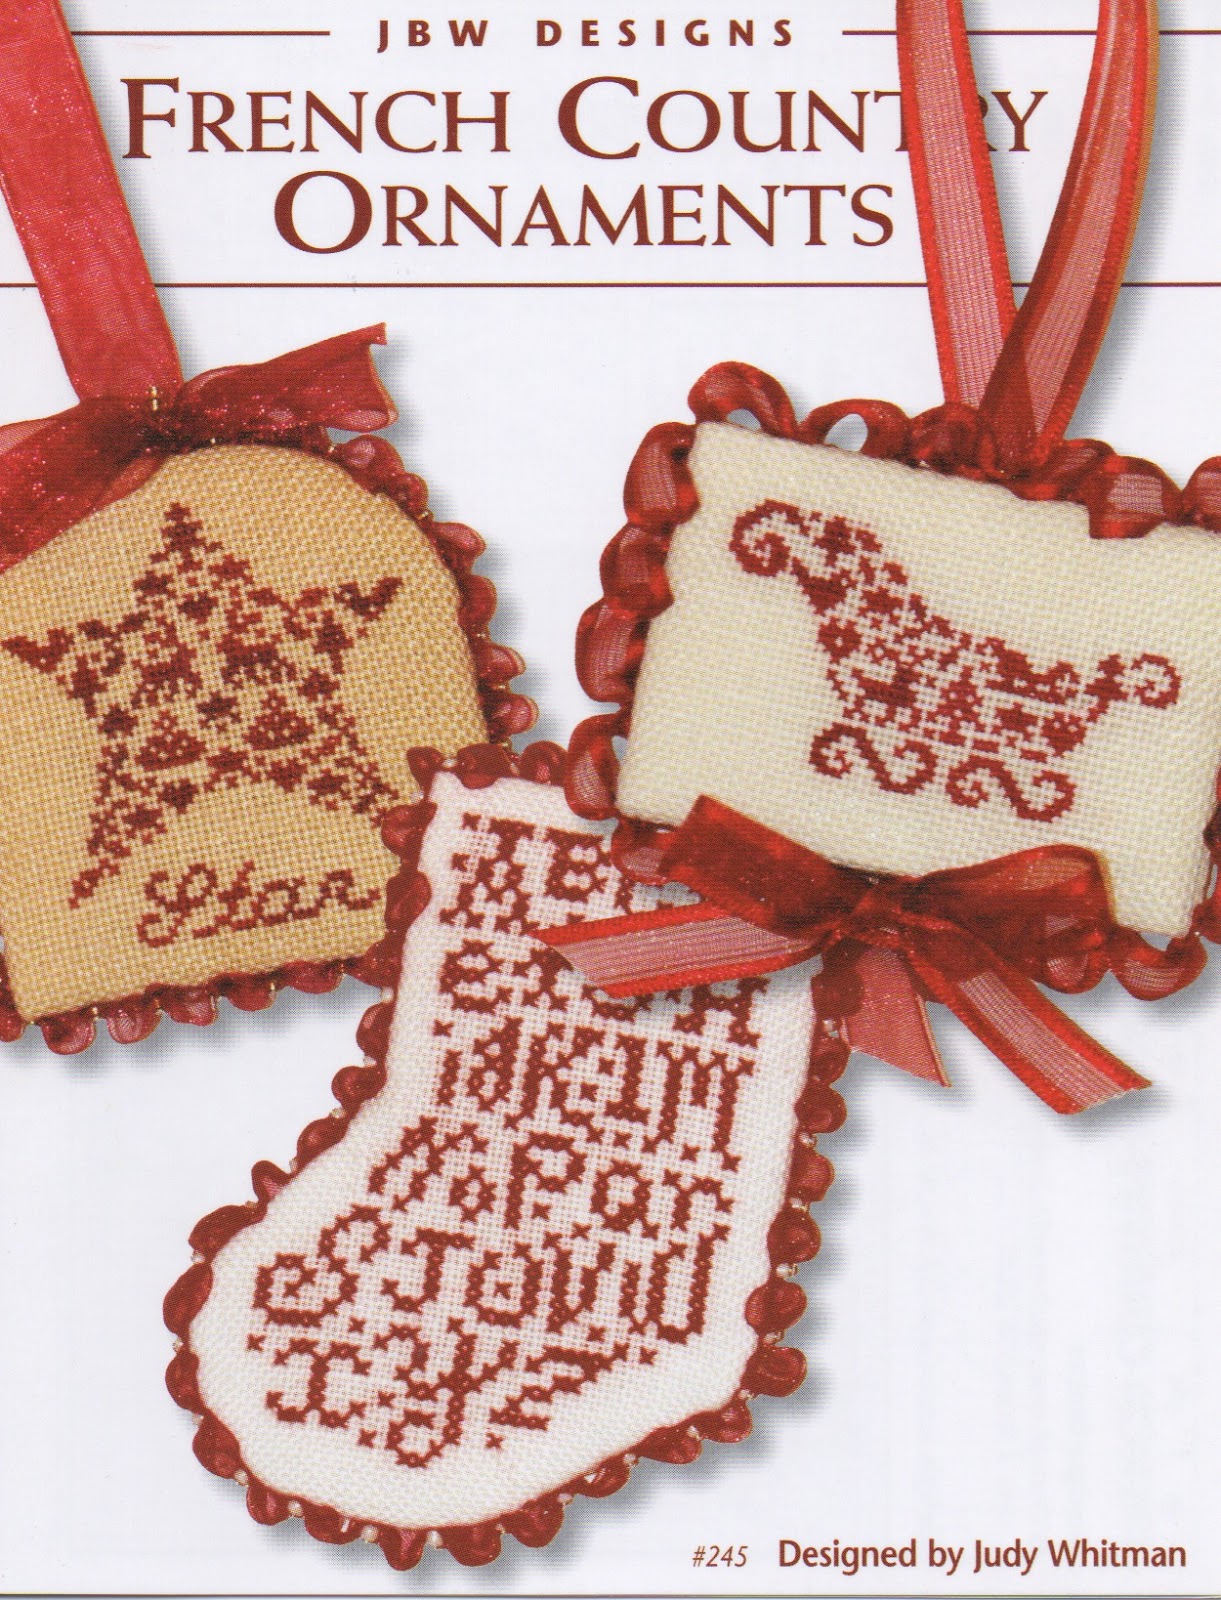 #245 French Country Ornaments by JBW Designs